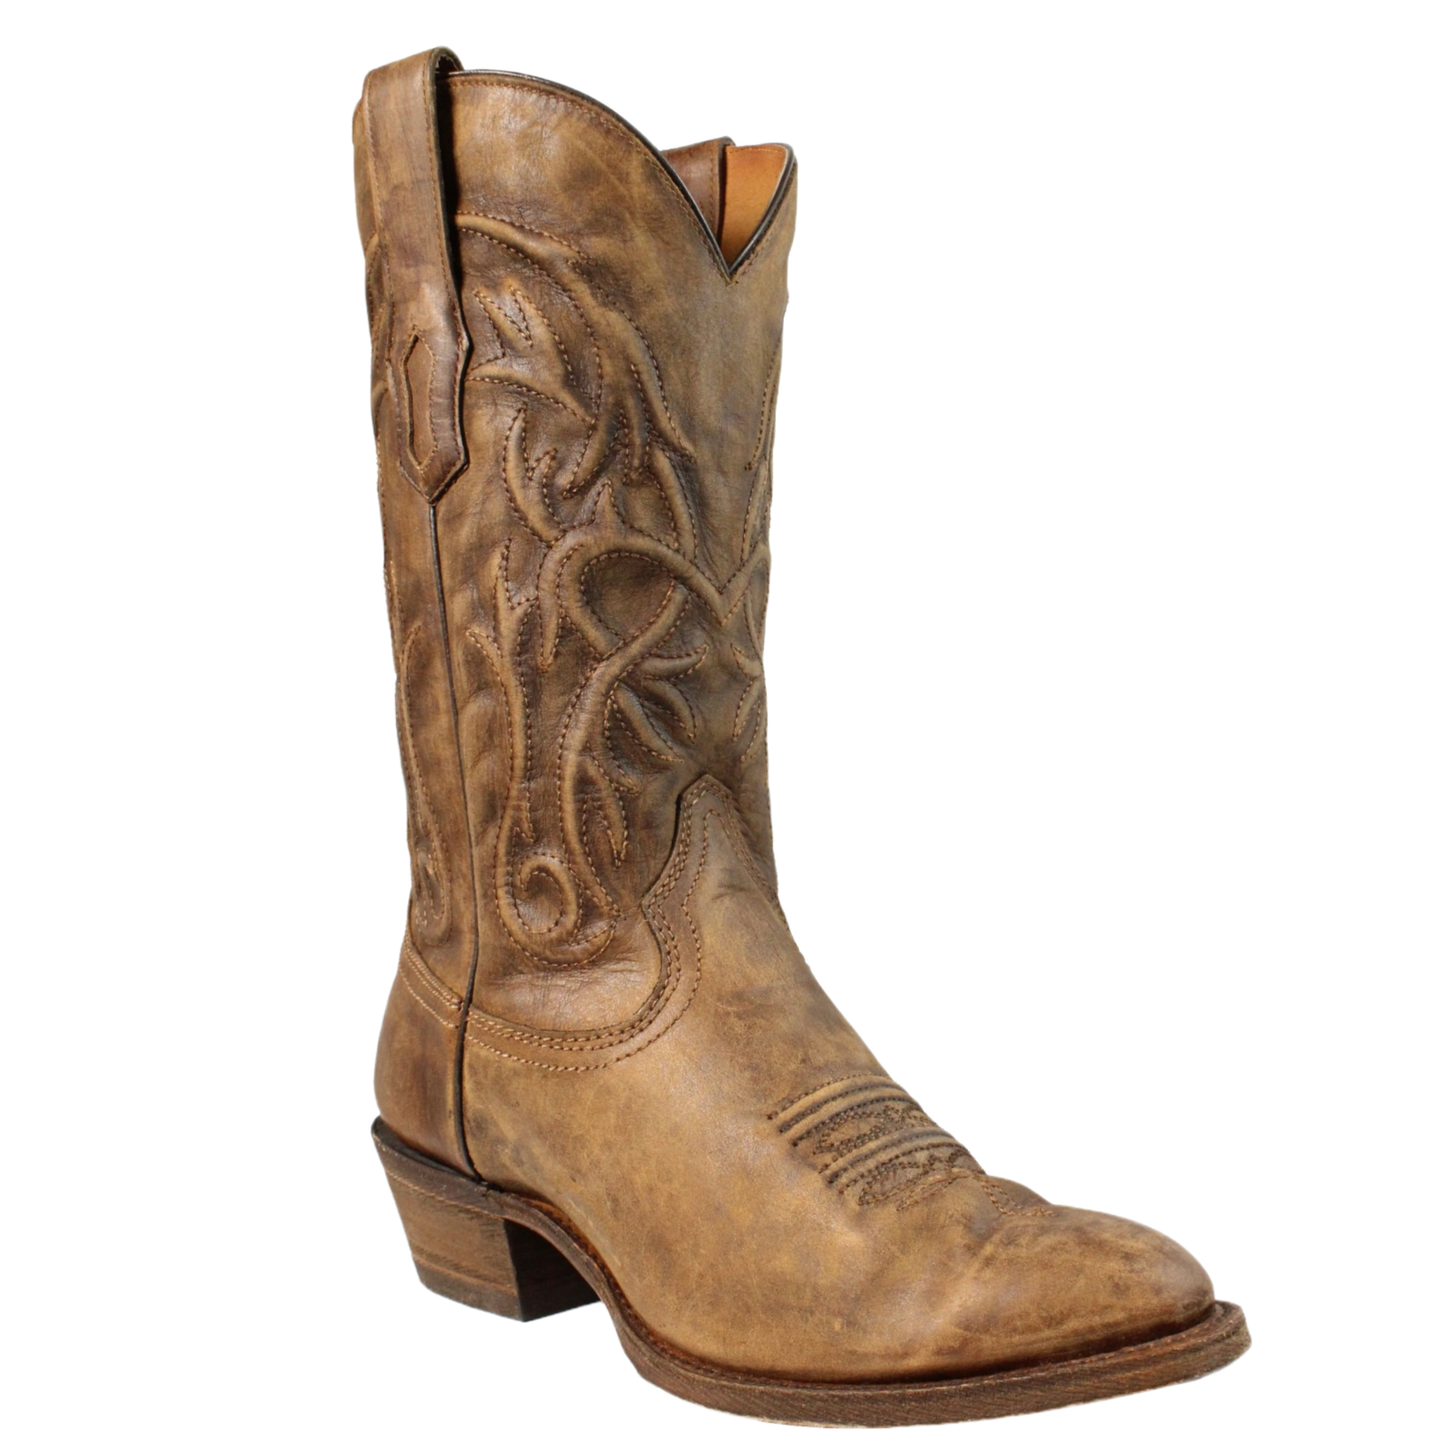 Corral Men's Vintage Golden Embroidery Western Boots A3254